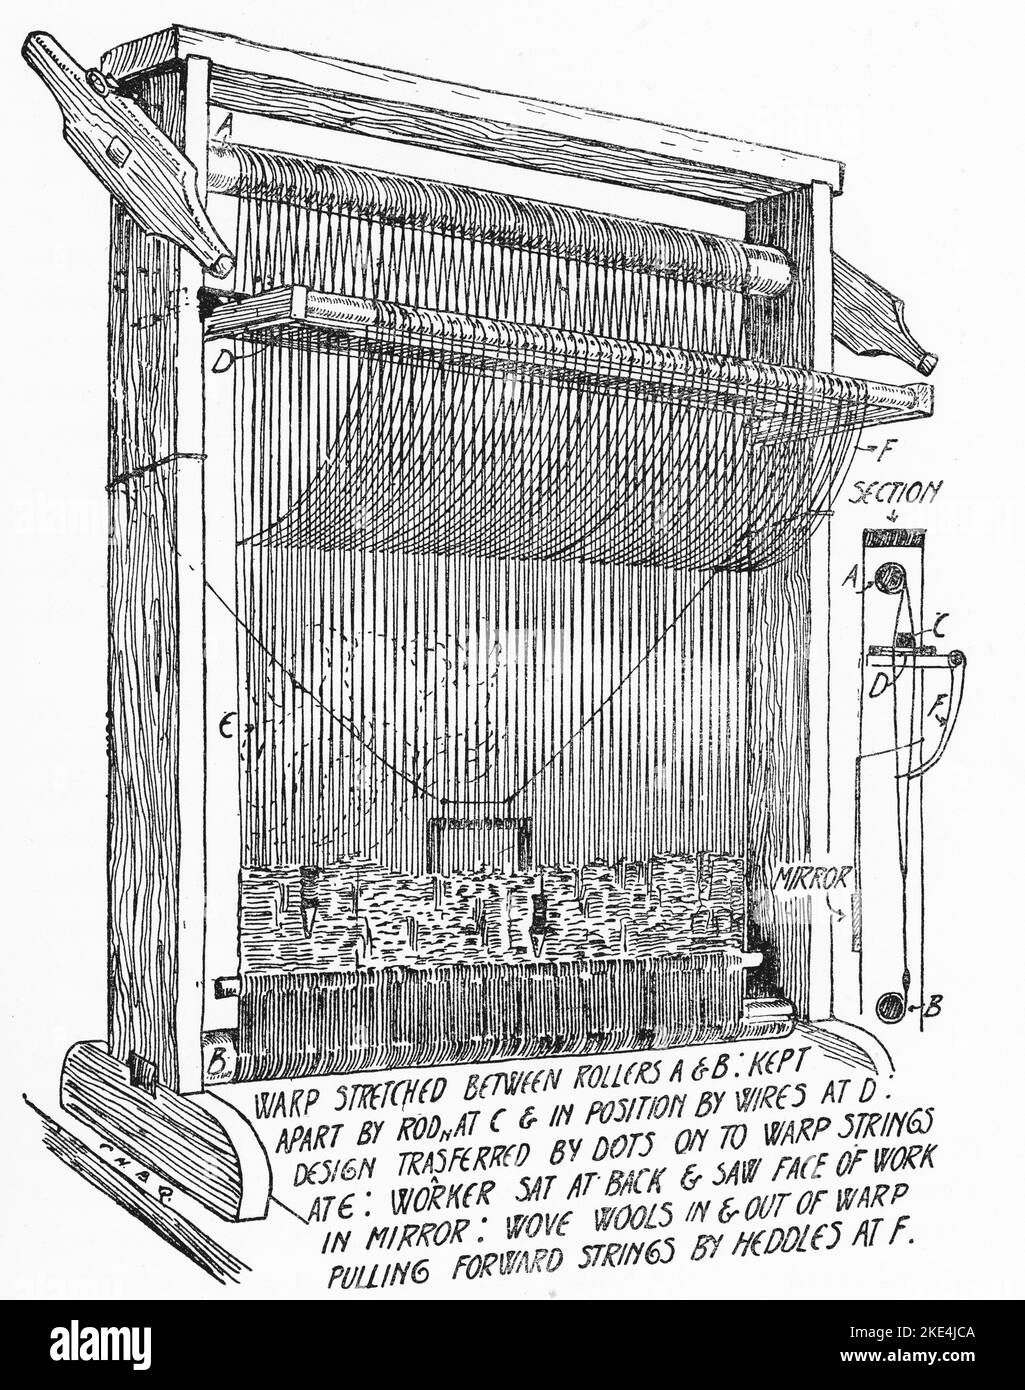 An illustration of a miniature, tapestry loom, by William Morris (1834-1896). Illustration by C. H. B. Quennell (1872-1935). Morris was an English textile designer, artist and writer. The prominent socialist was closely associated with the Pre-Raphaelite Brotherhood and English Arts and Crafts Movement. Stock Photo